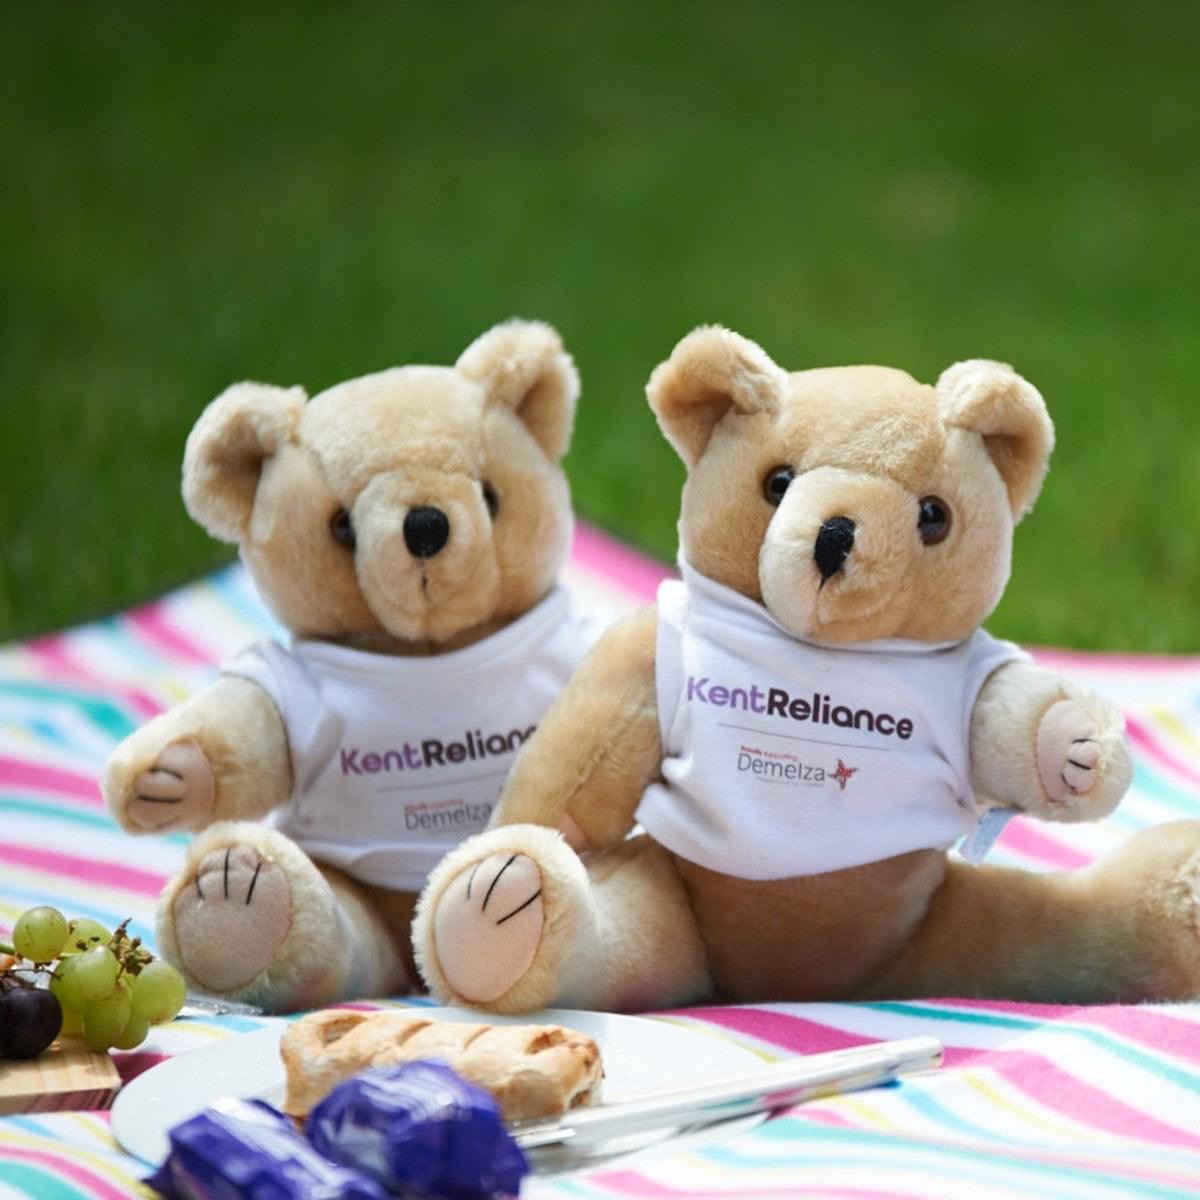 Two teddy bears sit together, wearing white tops with the Kent Reliance and Demelza logos.